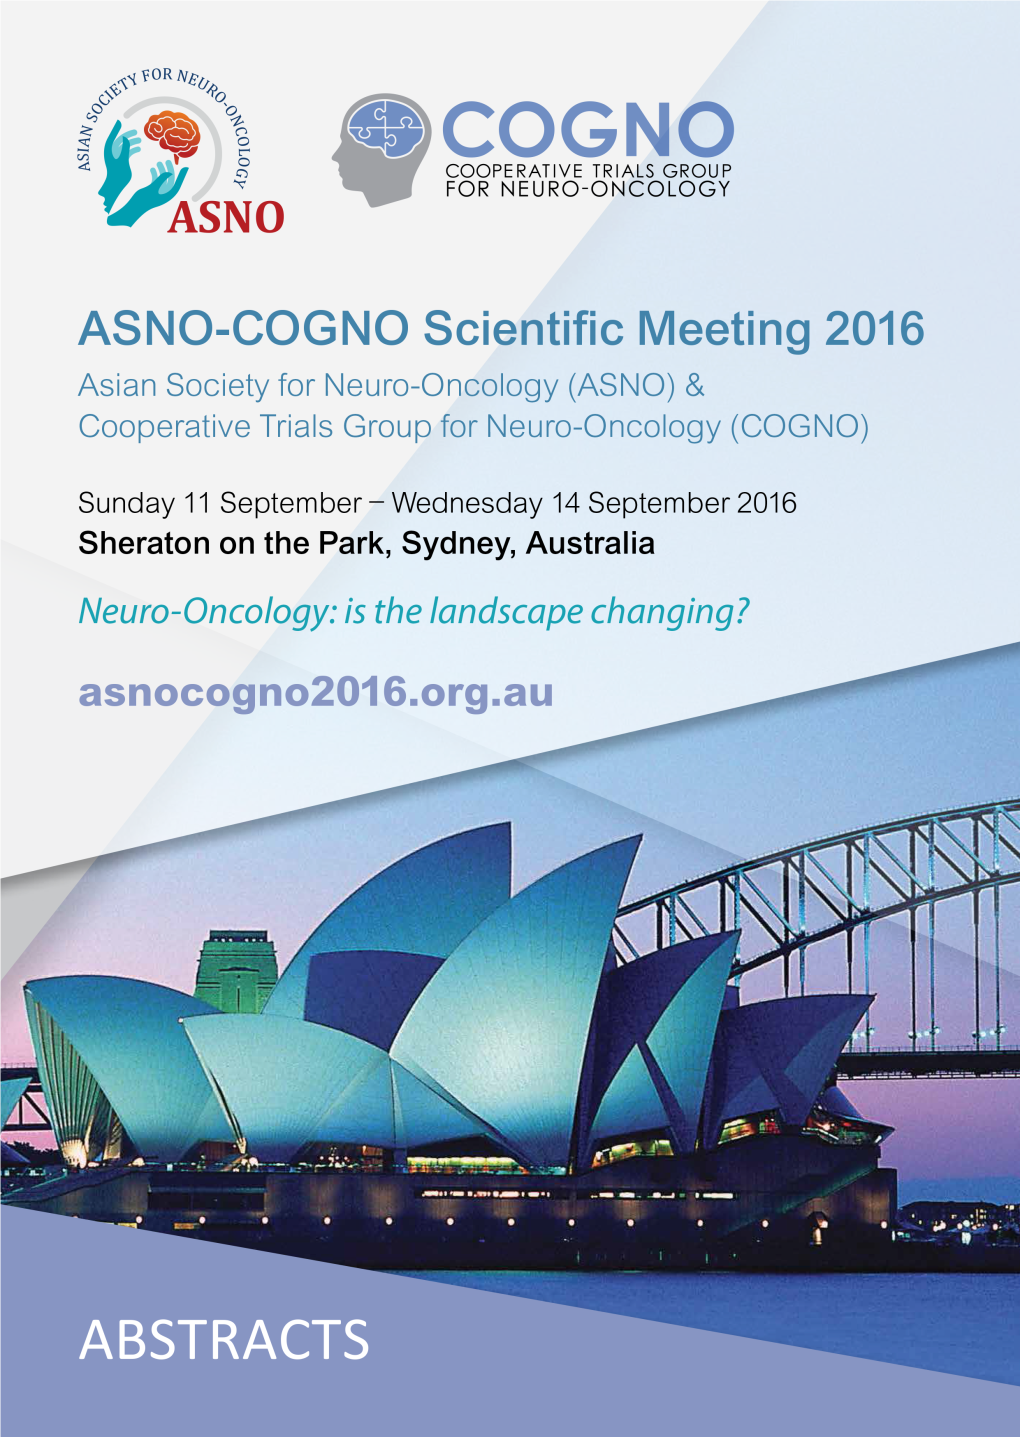 ASNO-COGNO Scientific Meeting 2016 Abstract Listing (O) Indicates Accepted for Oral Presentation, All Others Accepted for Poster Presentation